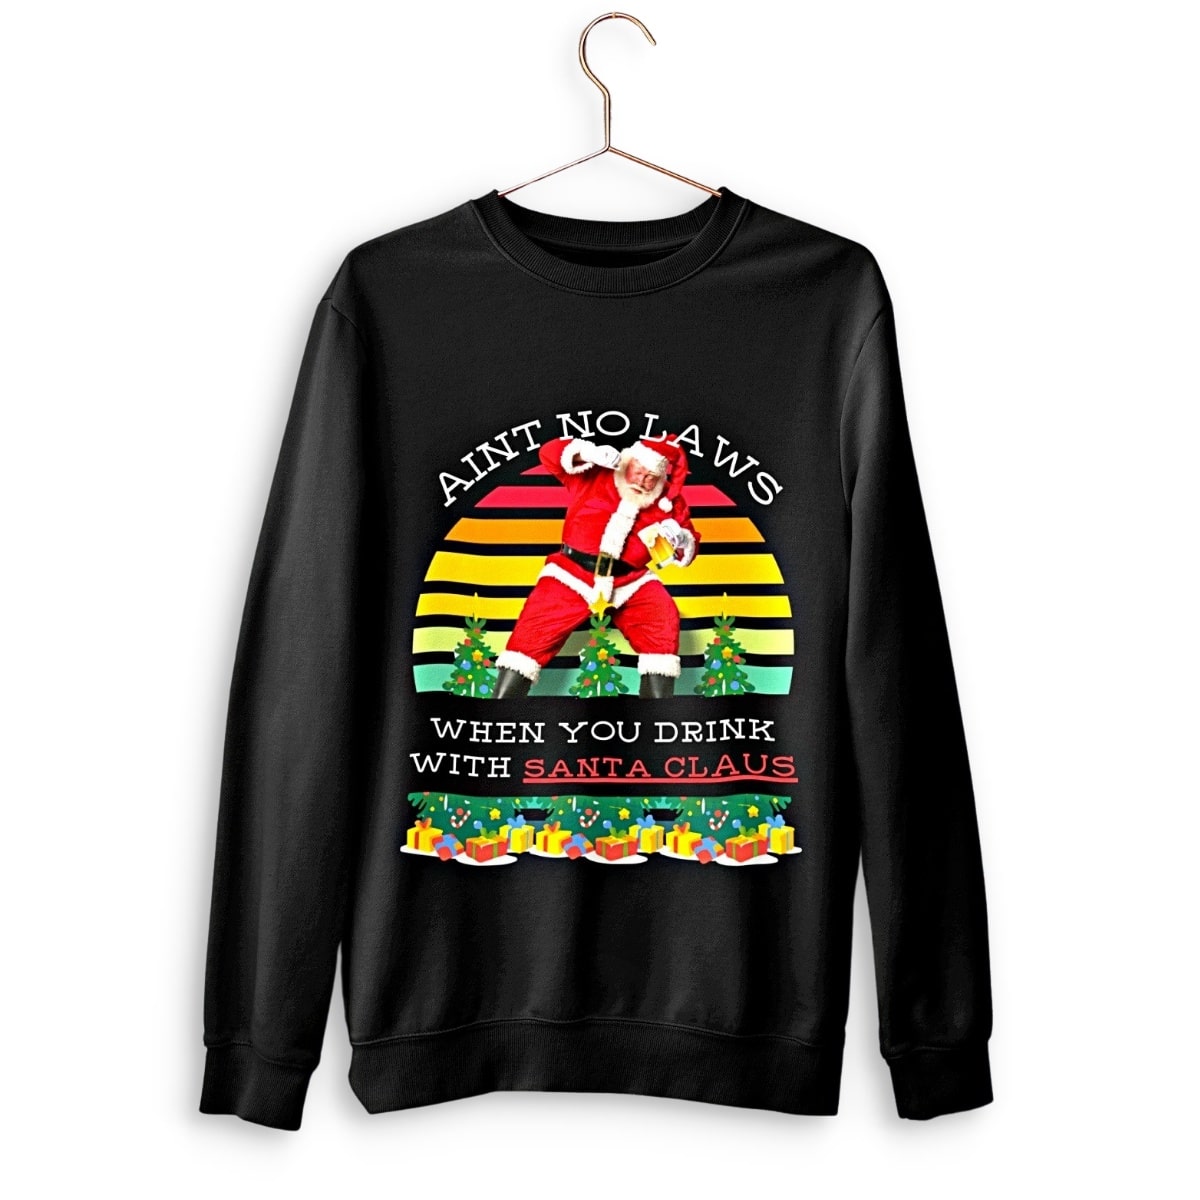 "Ain't no laws when you drink with santa claus" Ugly christmas Sweater From Santaland, Black